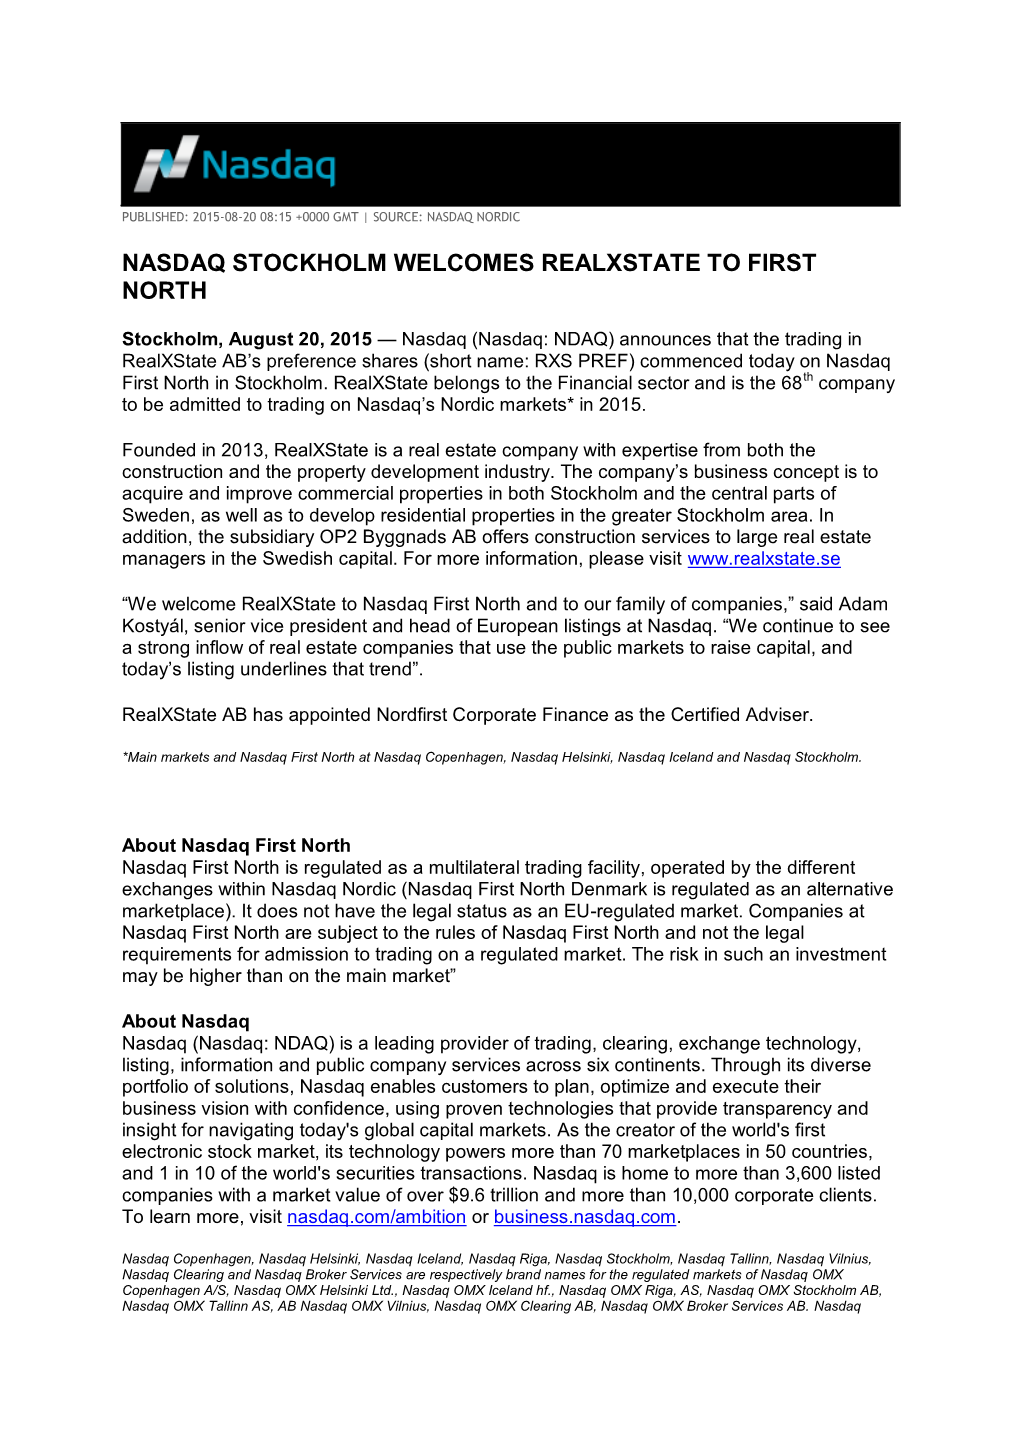 Nasdaq Stockholm Welcomes Realxstate to First North